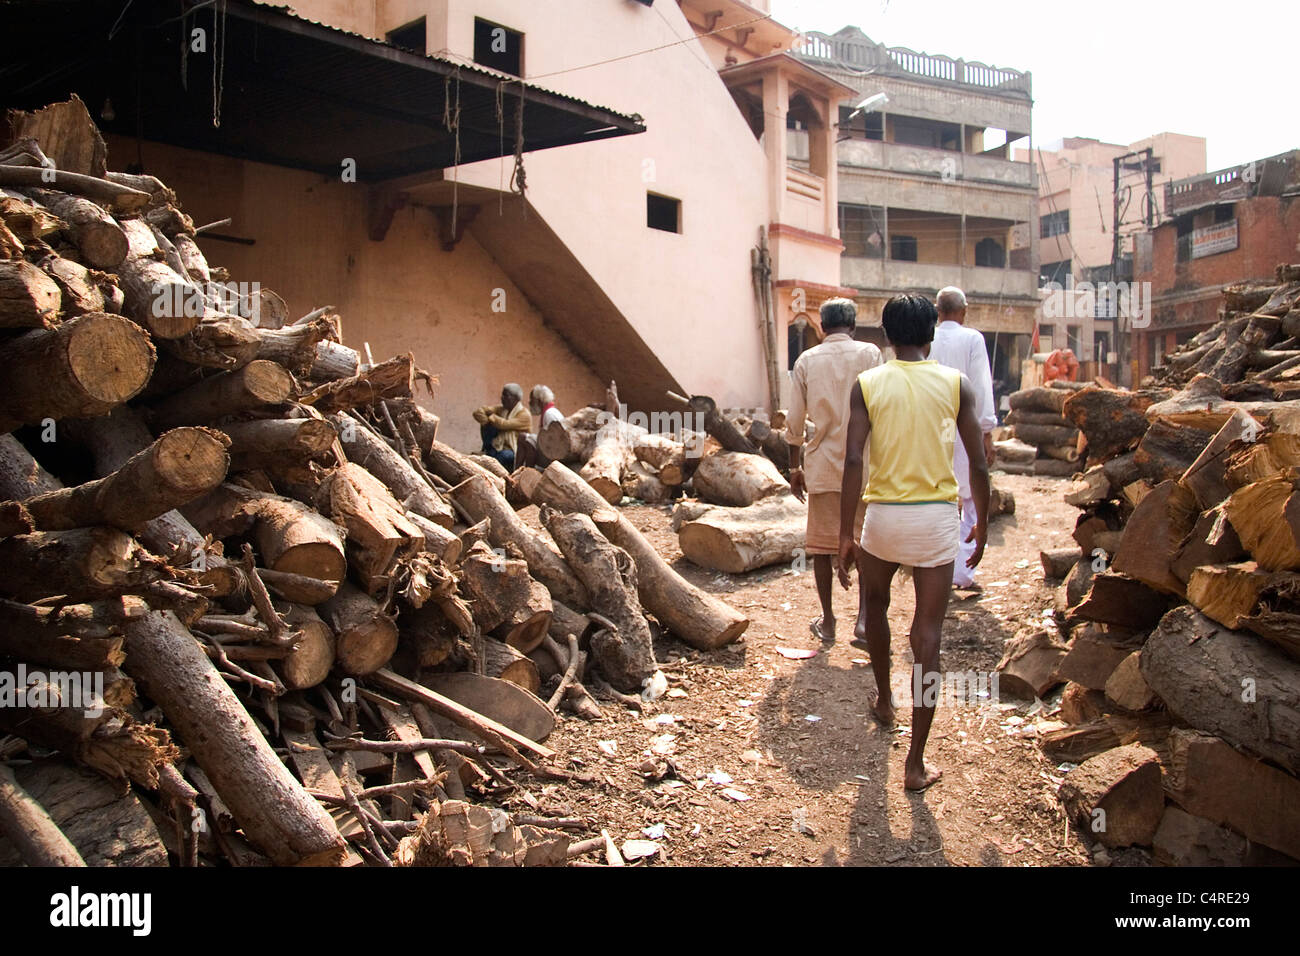 Locals walking by pile of wood used for the burning ghats, Varanasi, India Stock Photo